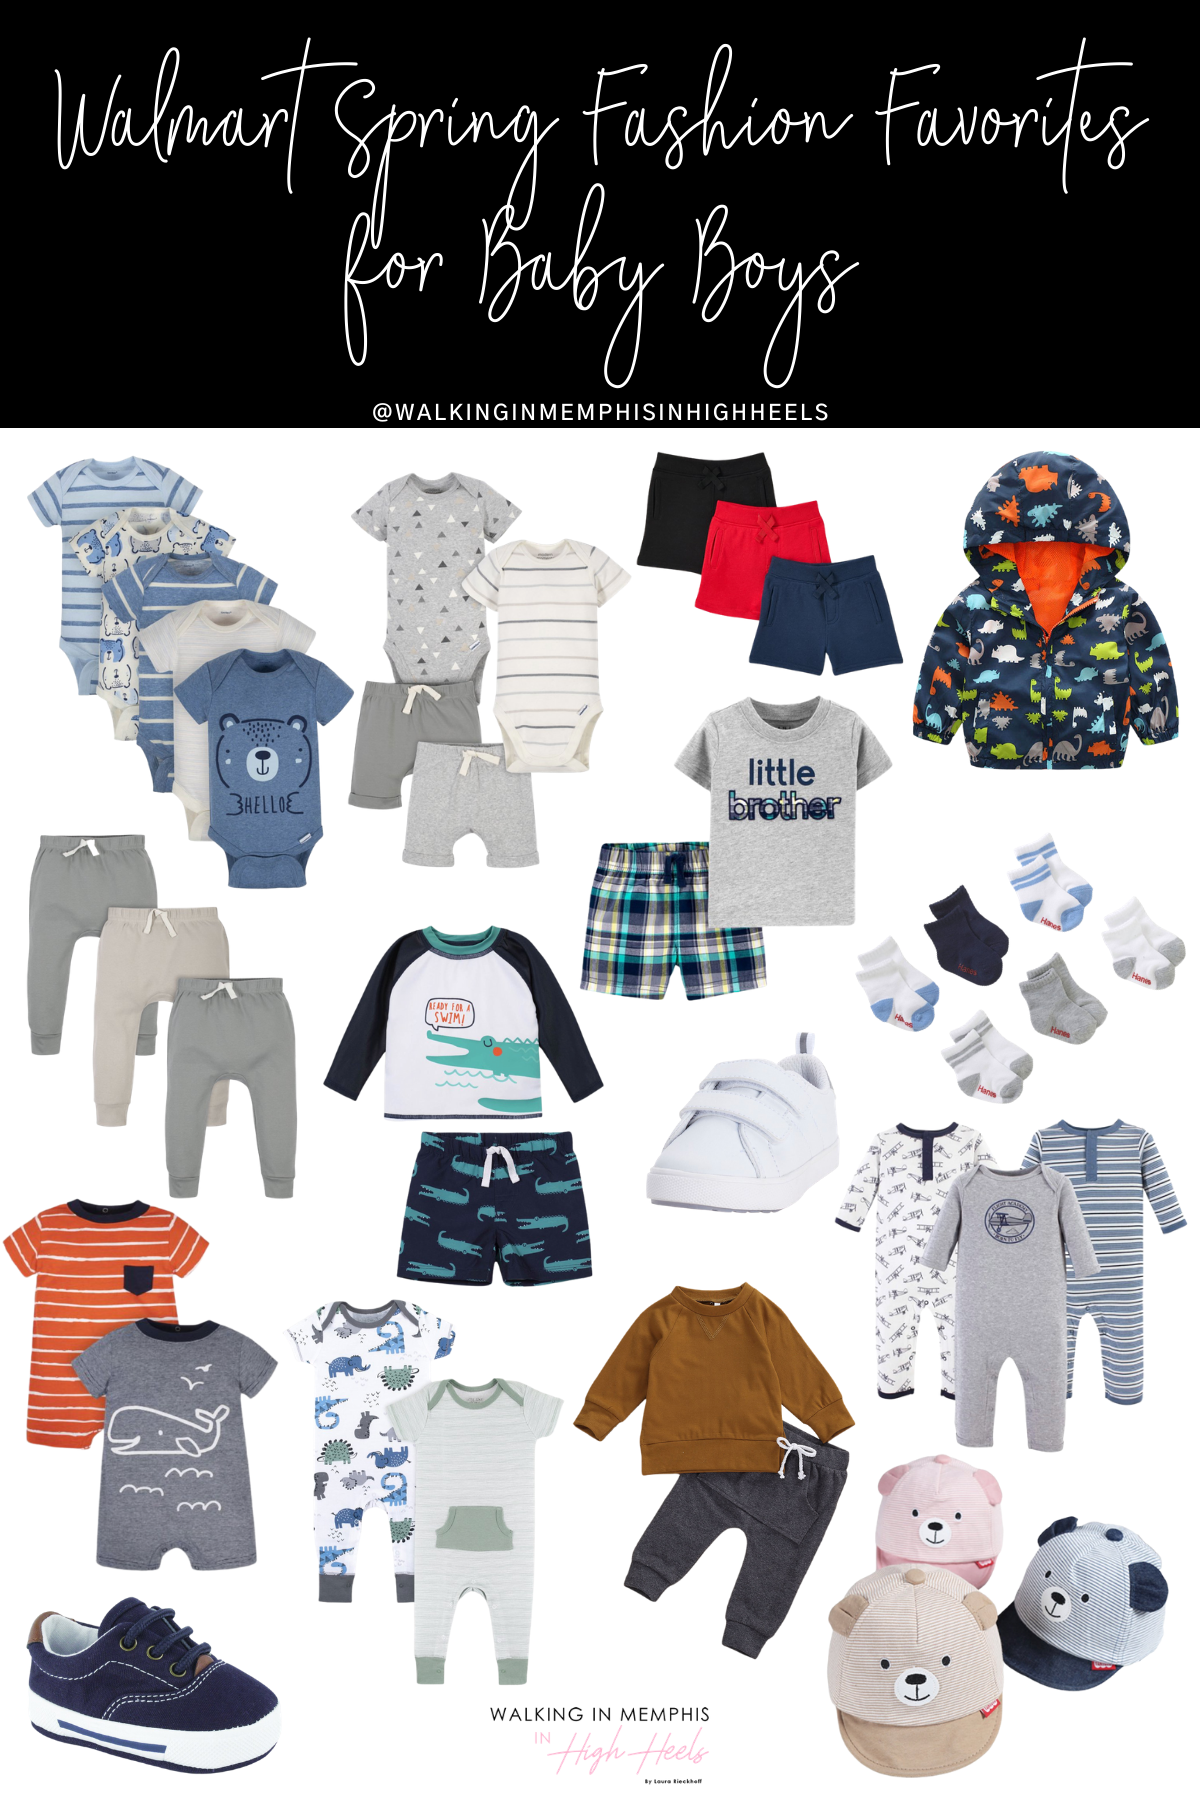 Walmart fashion spring favorites for baby boys featured by top Memphis mommy blogger, Walking in Memphis in High Heels.